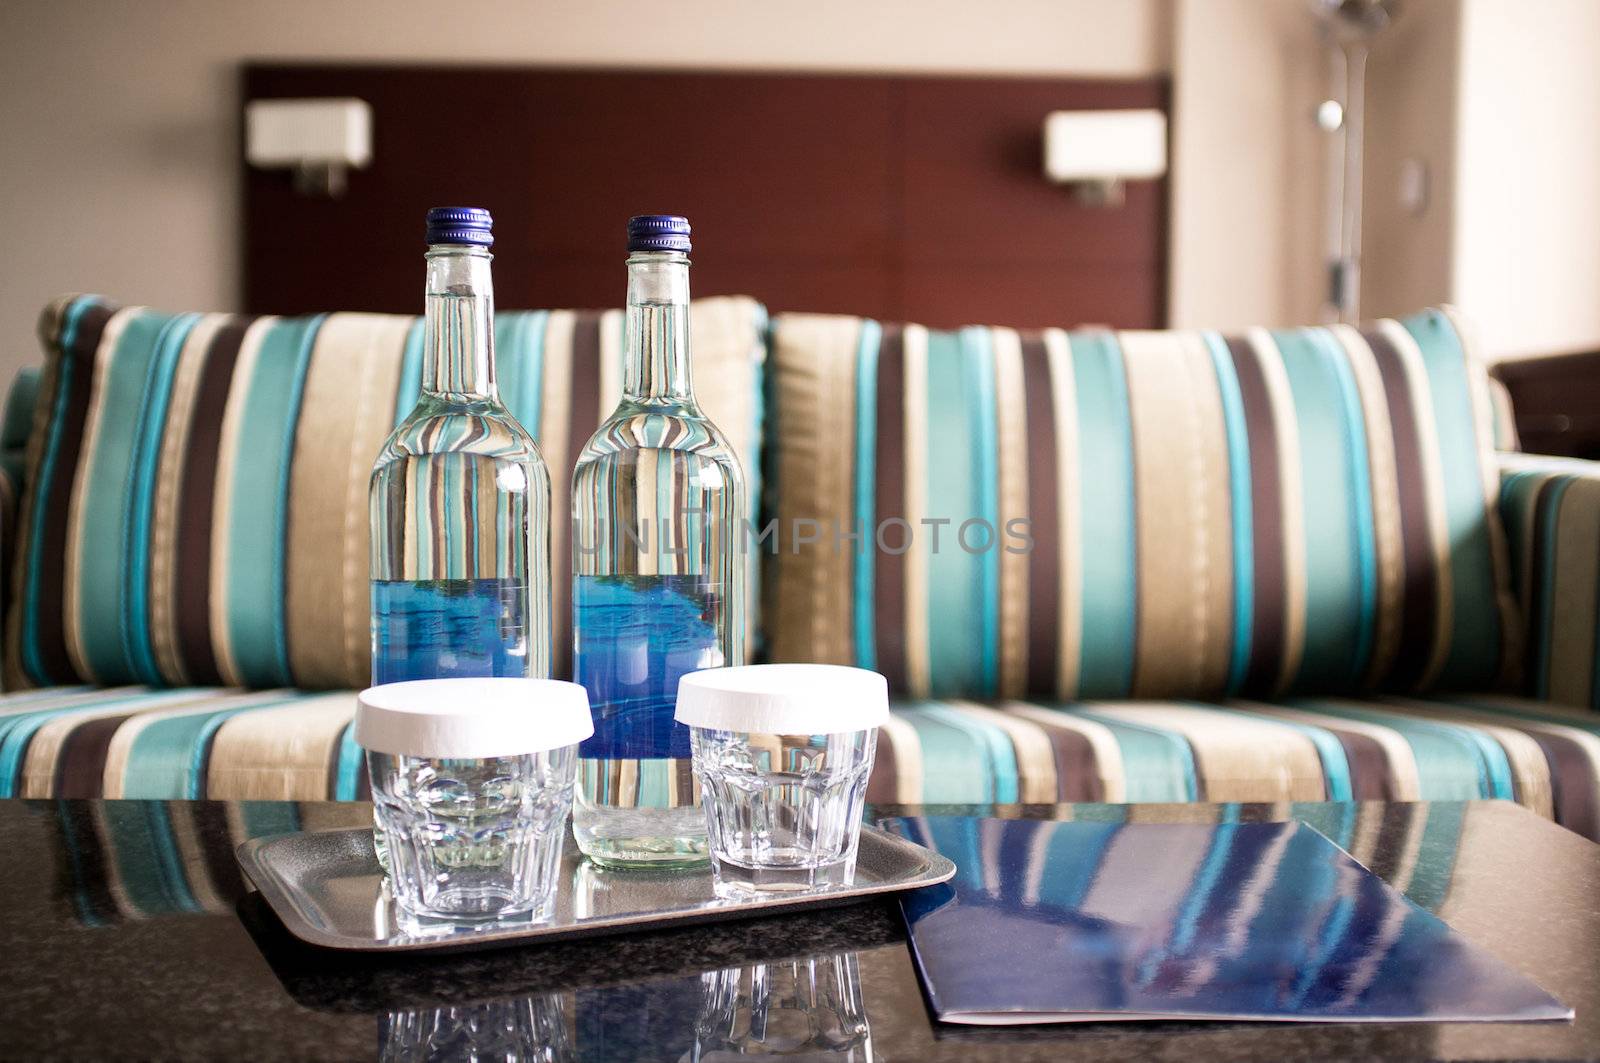 Hotel room shot. Beverage bottles in focus with couch in the background